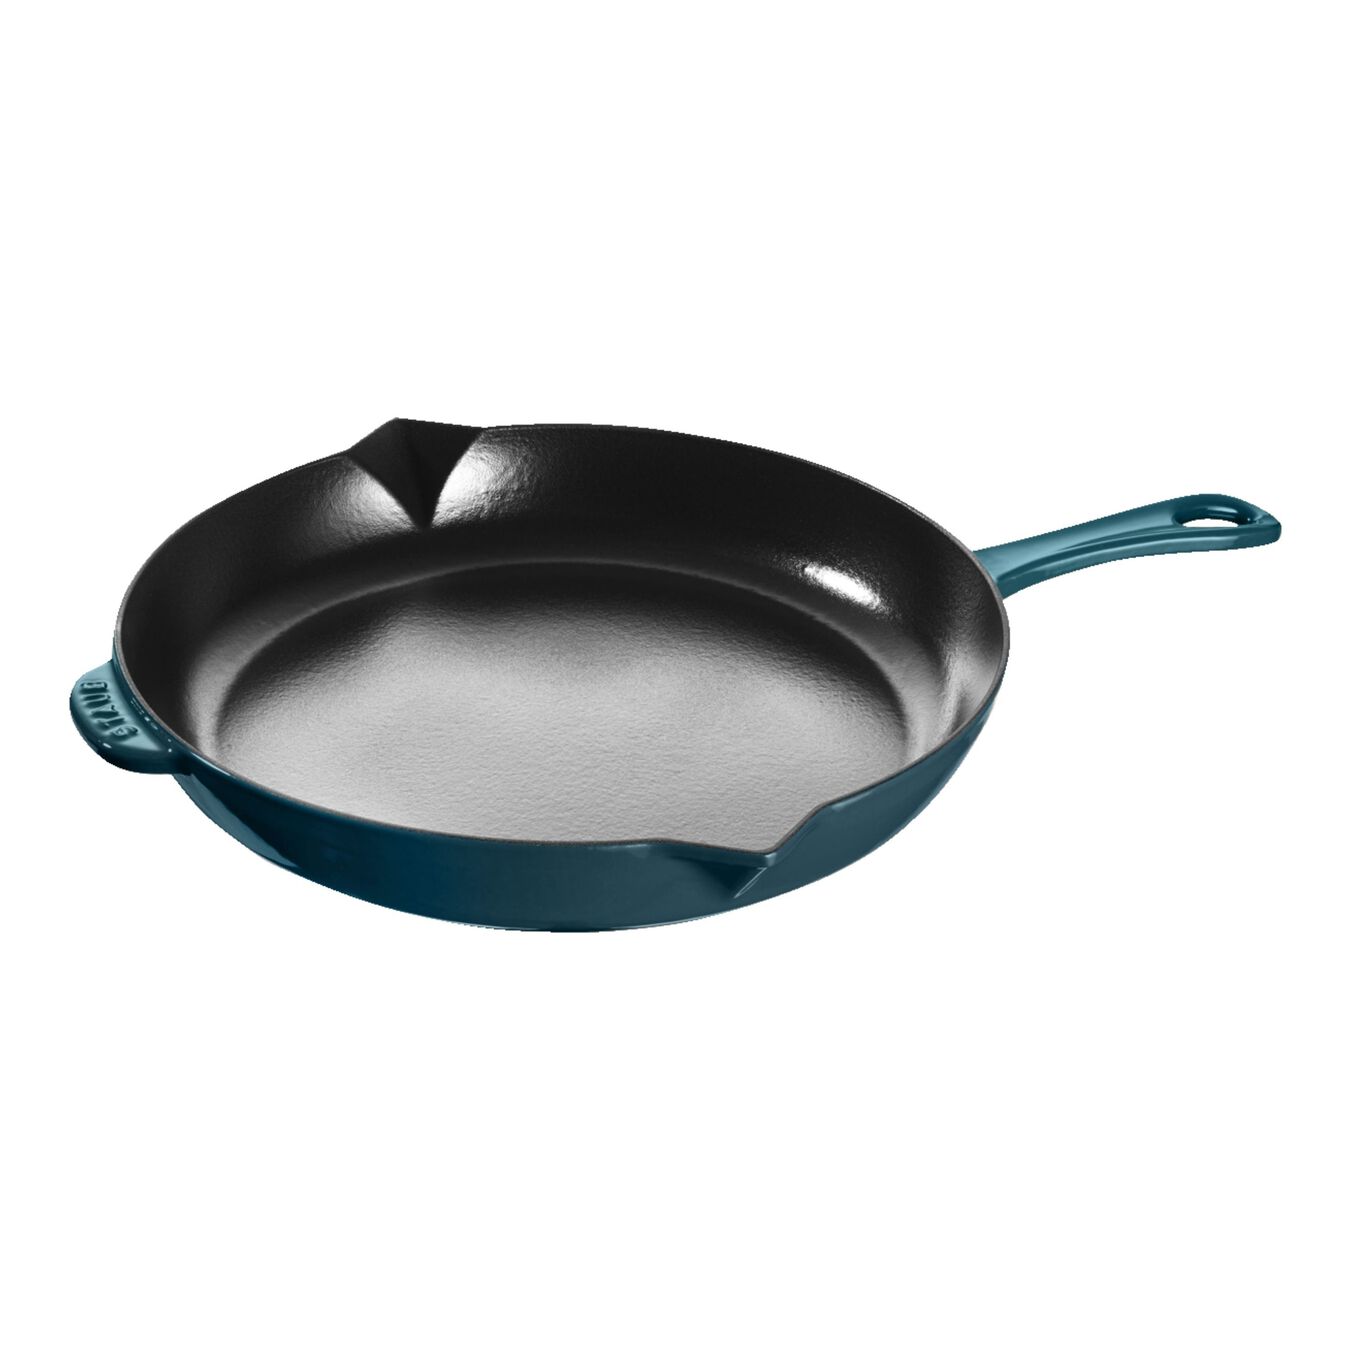 30 cm / 12 inch Frying pan, la-mer - Visual Imperfections,,large 1